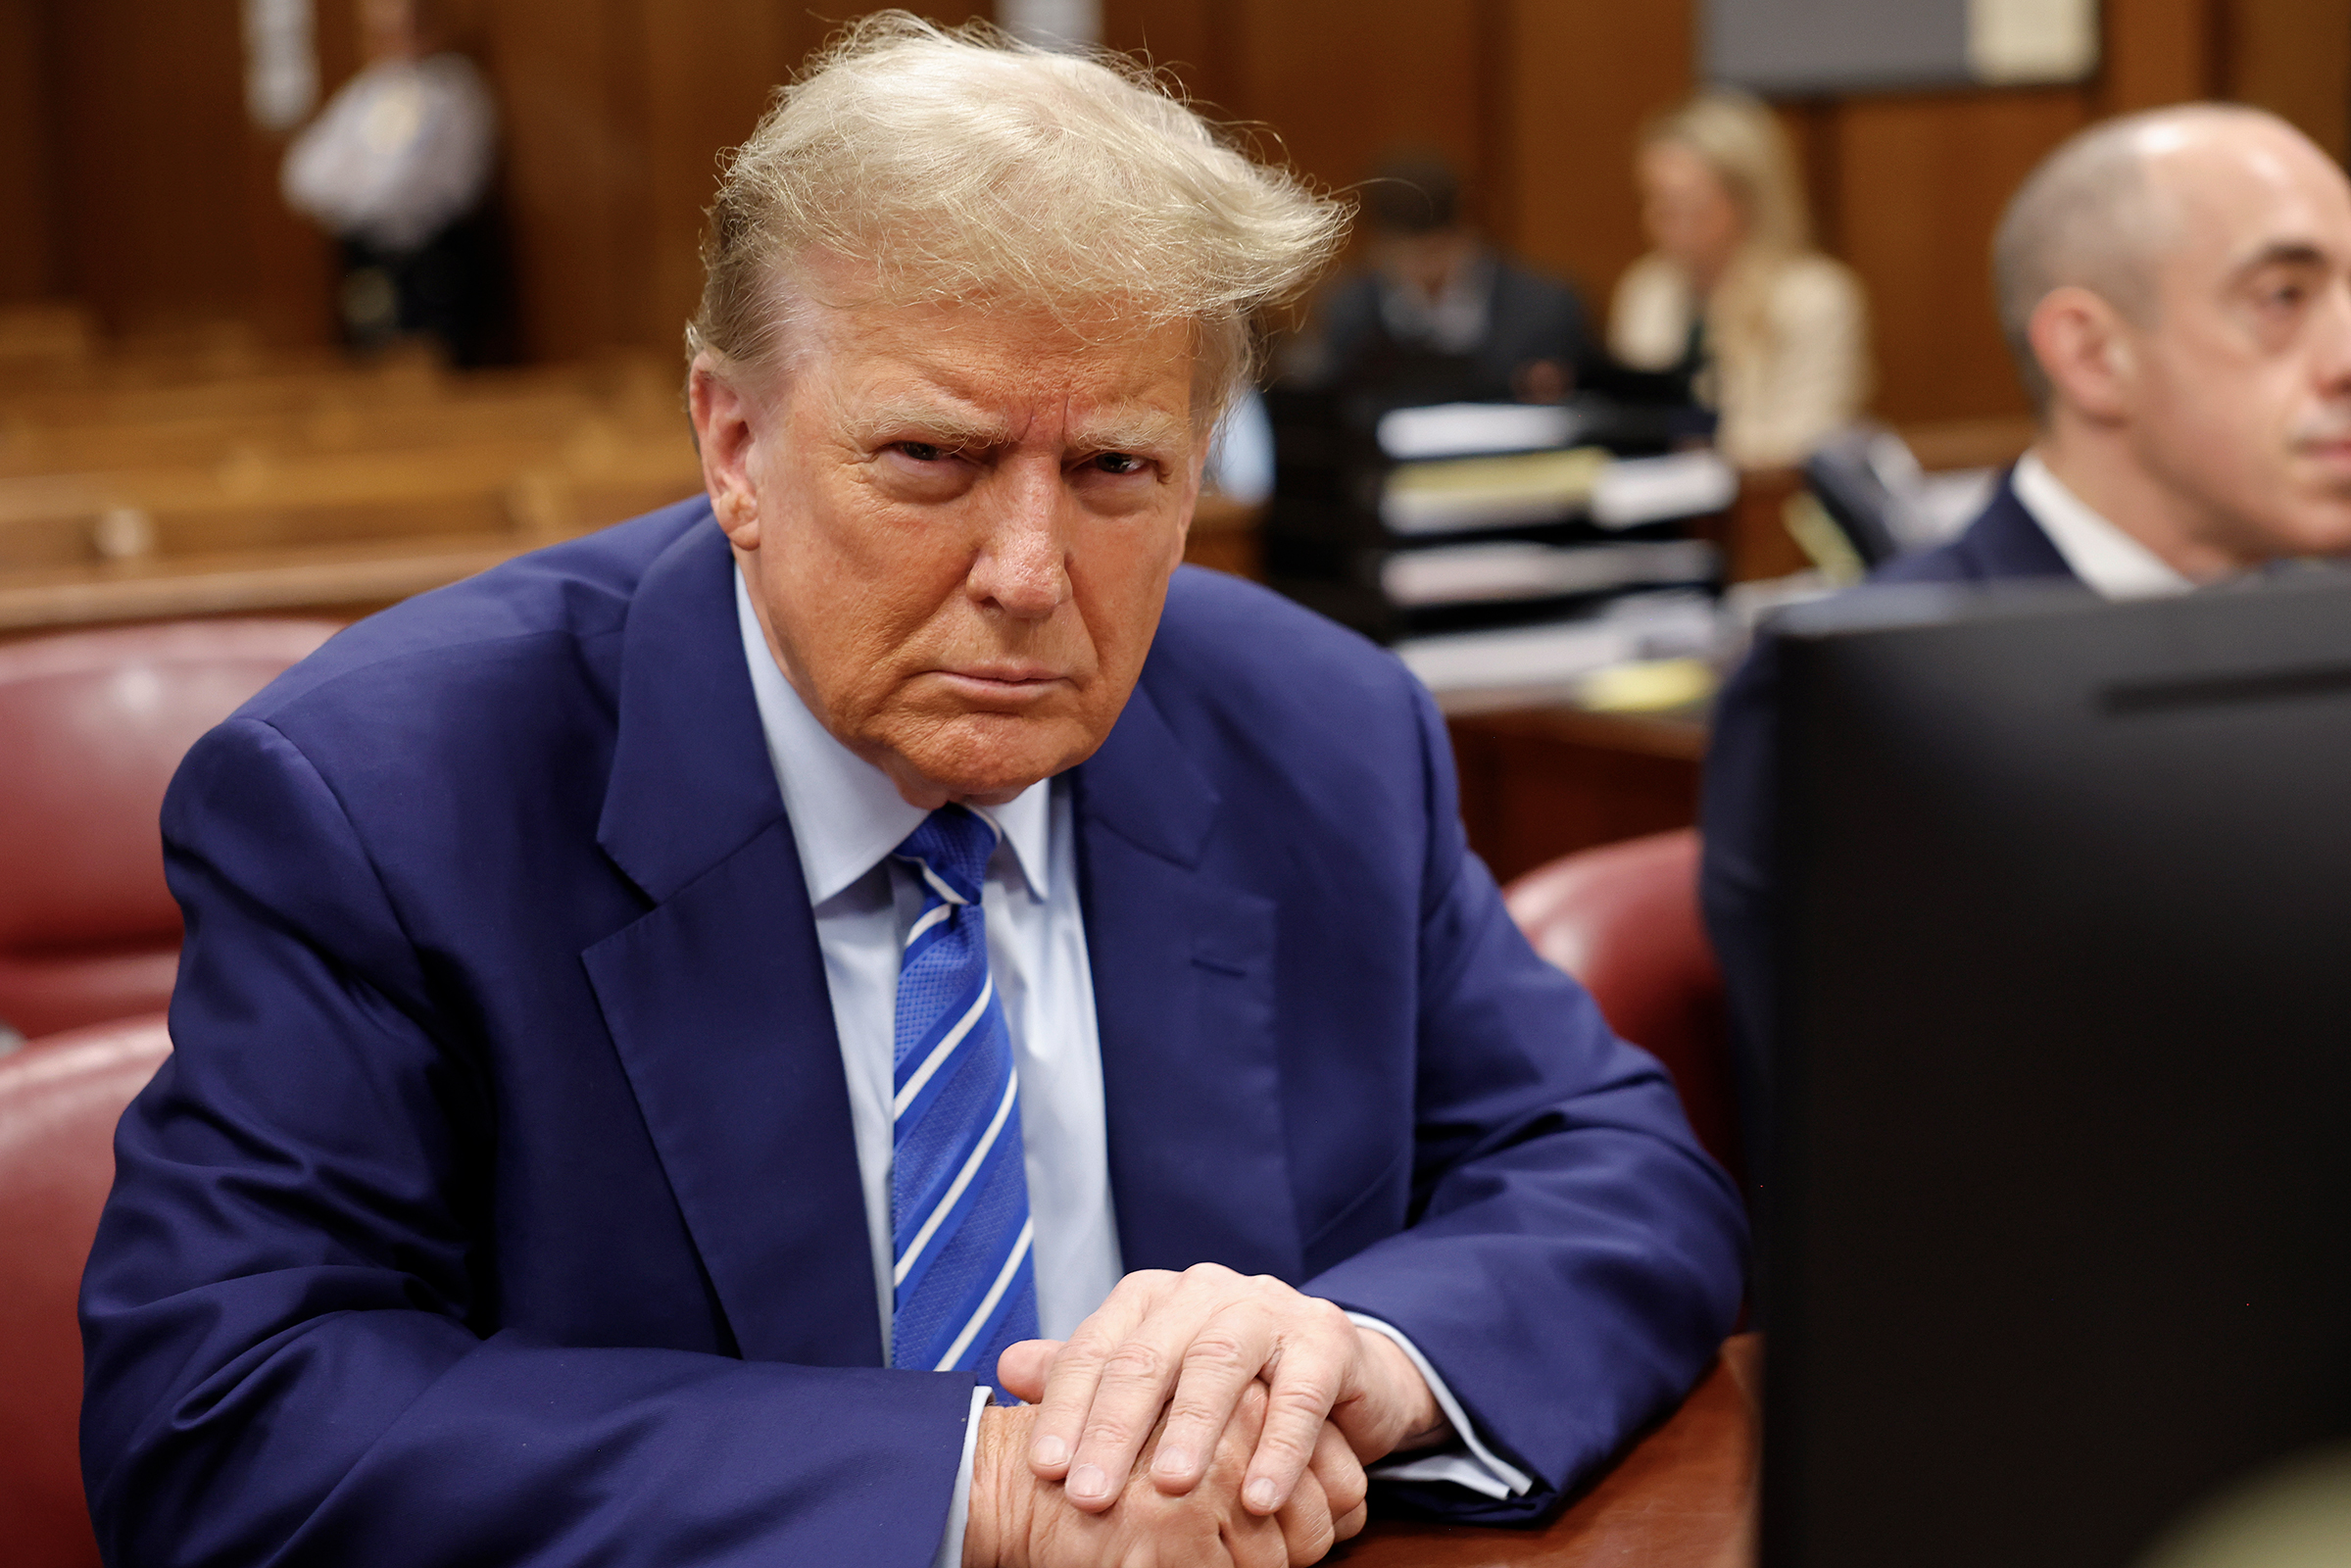 Former President Donald Trump sits in the courtroom during the second day of his criminal trial at Manhattan Criminal Court on April 16 in New York City.